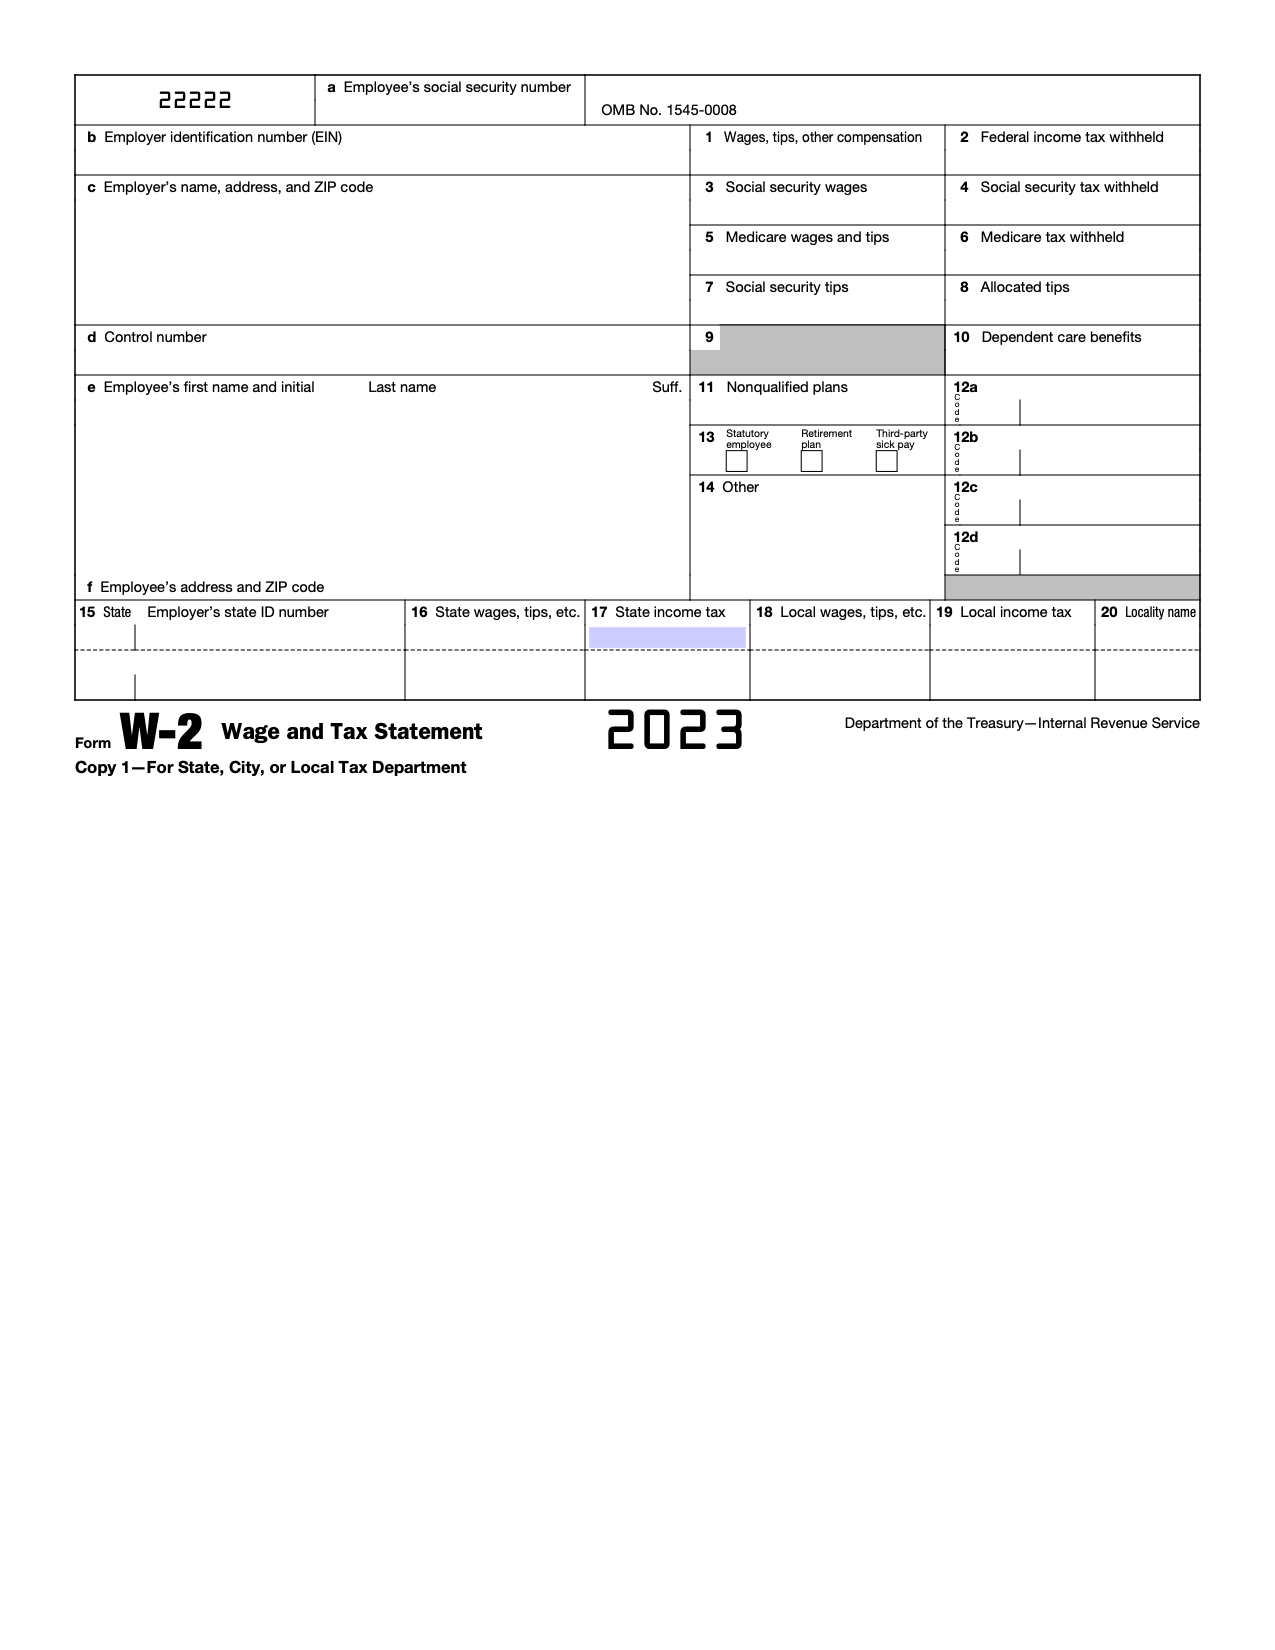 Free Irs Form W-2 | Wage And Tax Statement - Pdf – Eforms throughout W2 Form 2023 Pdf Download